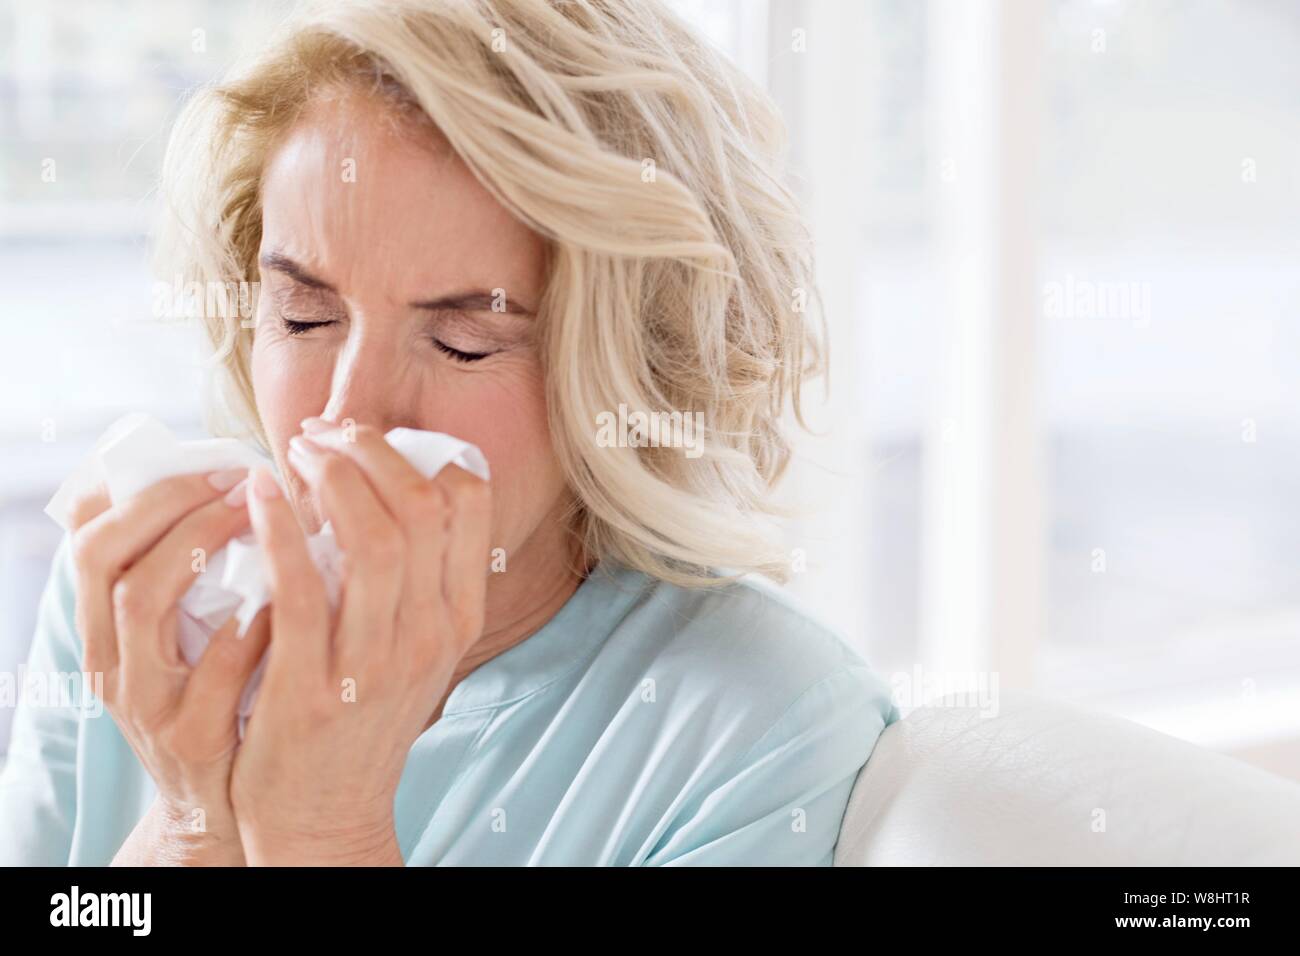 Mature woman blowing nose on tissue. Stock Photo